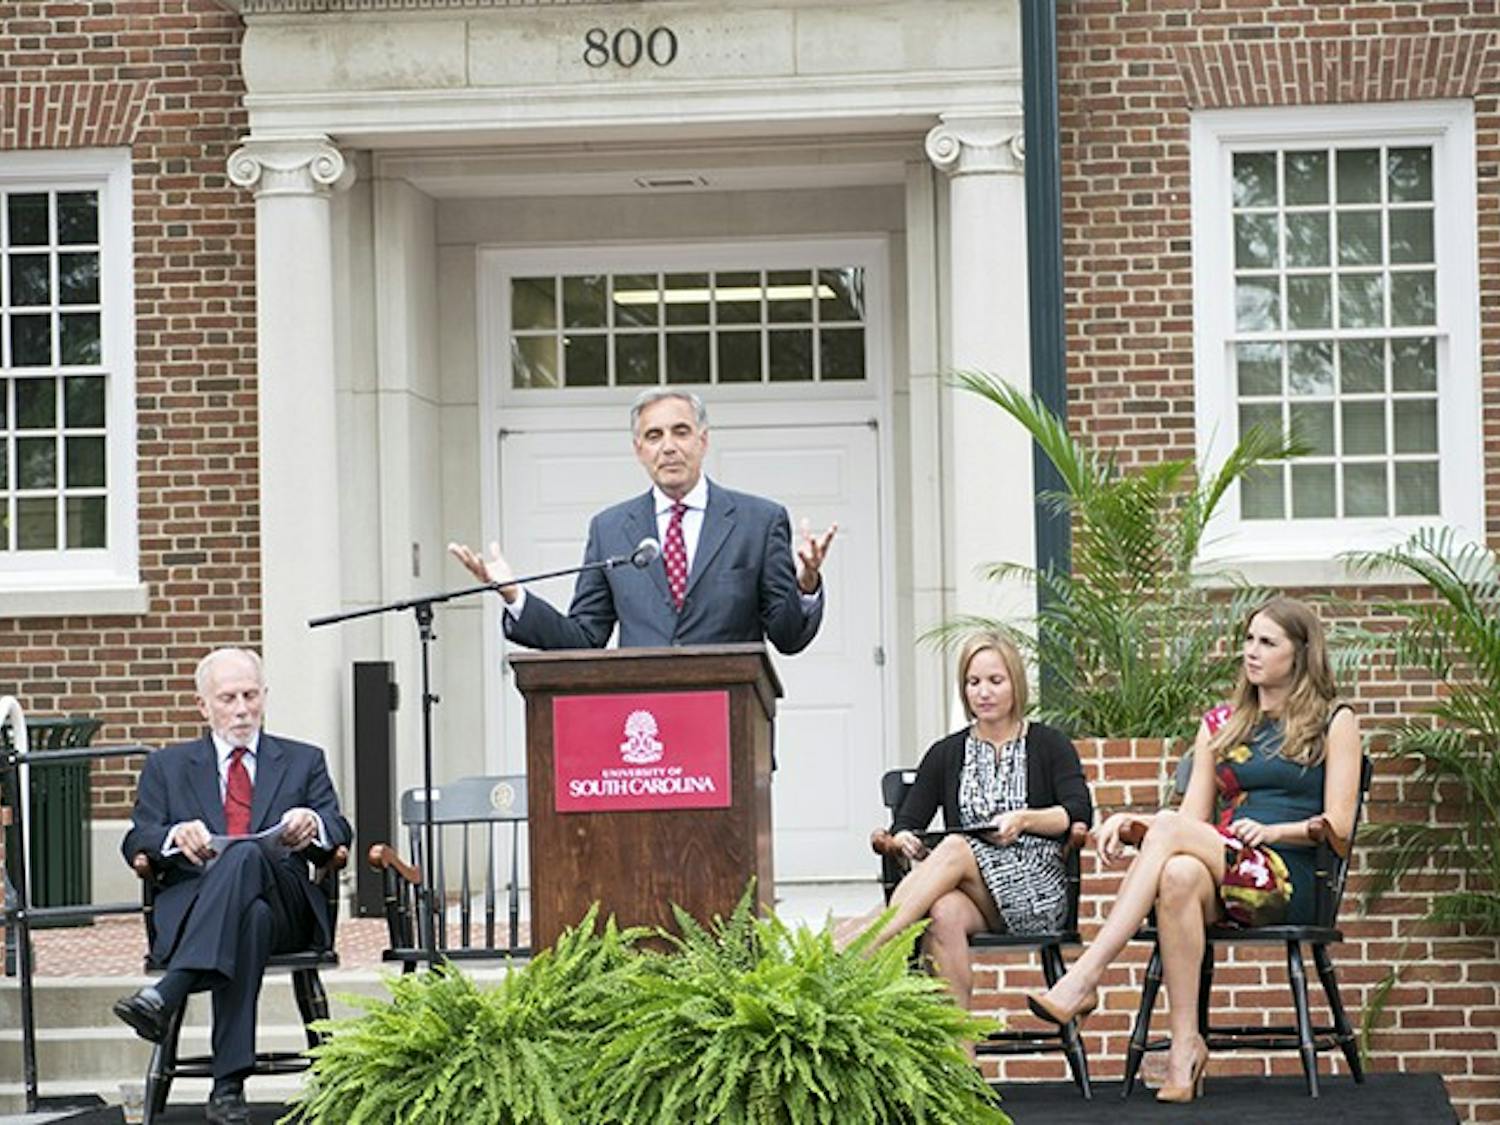 The official dedication ceremony for the School of Journalism and Mass Communications at U of SC. Darius Rucker and Mark Ryan held a free concert on the Horseshoe as part of the dedication.